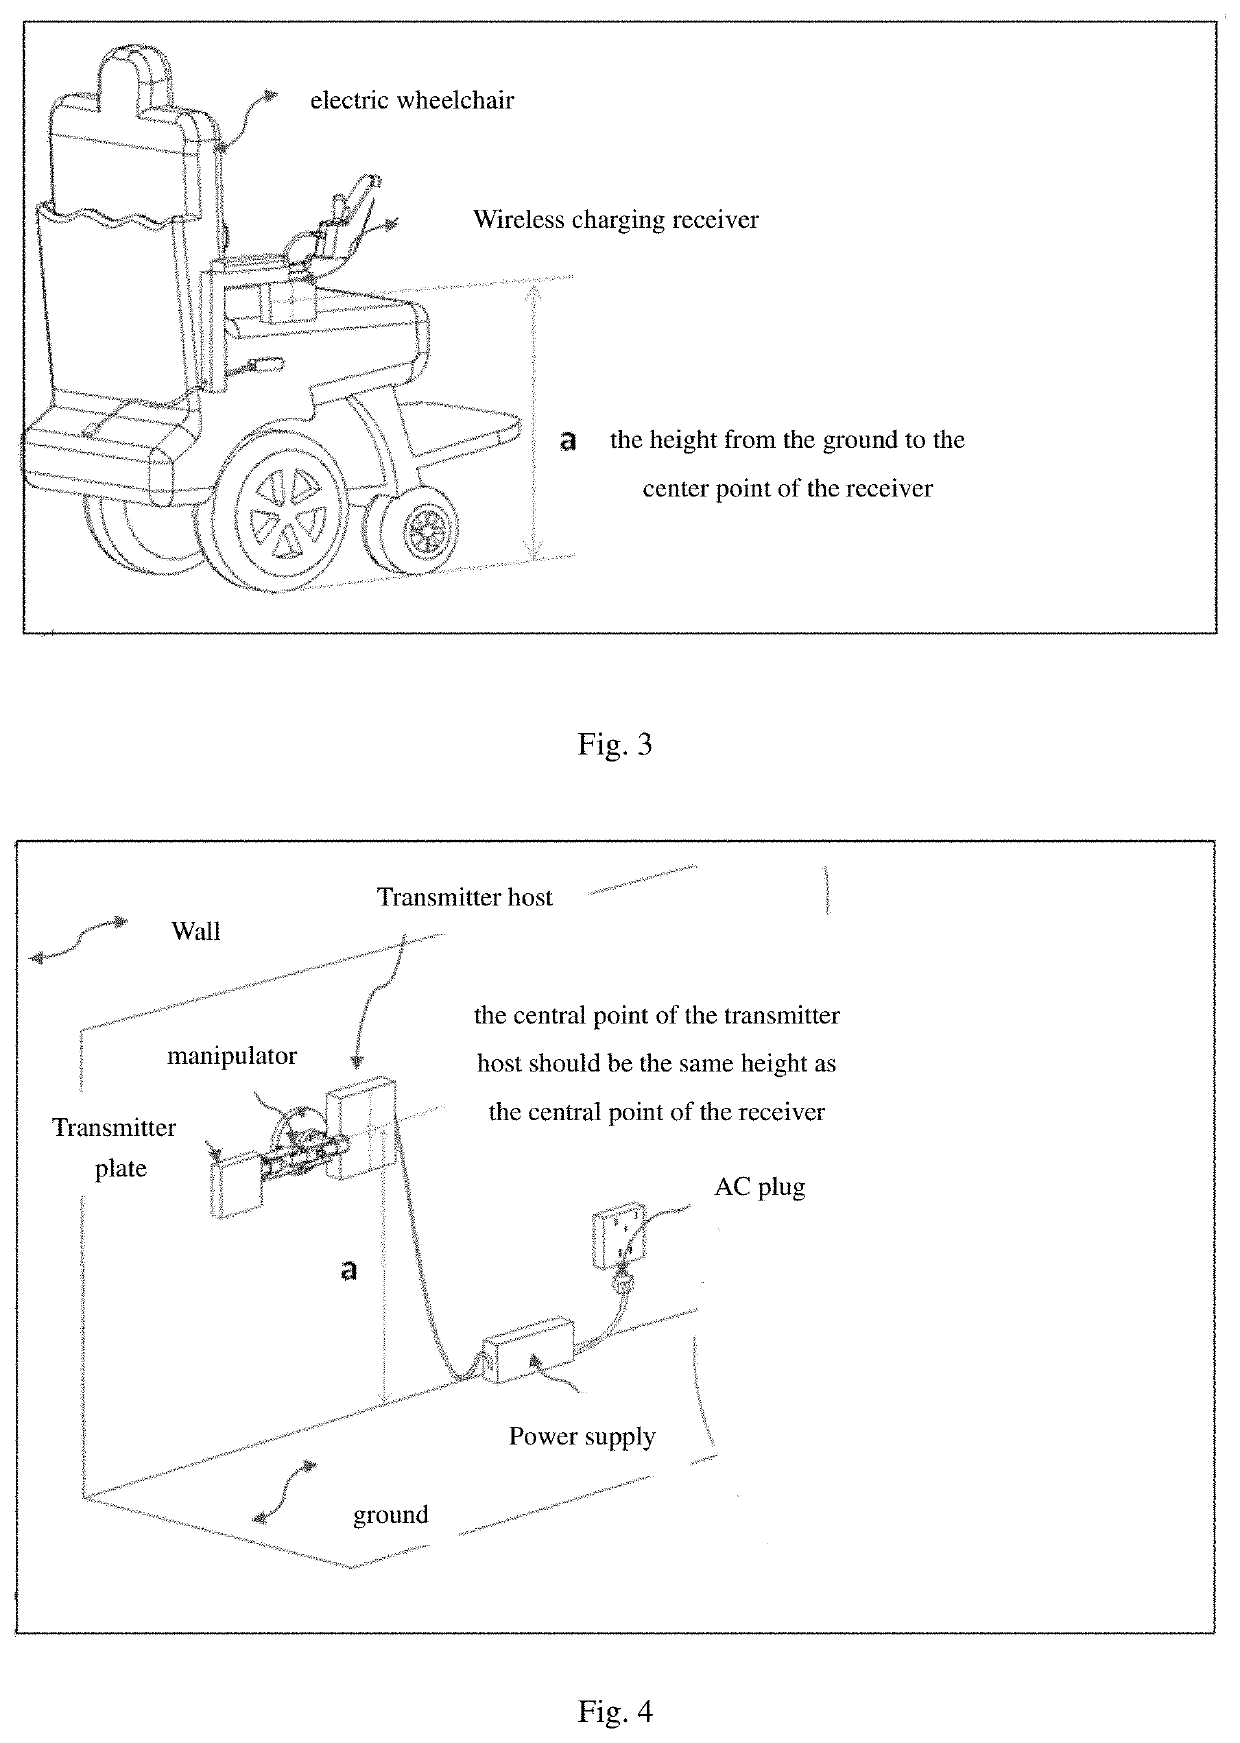 Intelligent power wireless charging system for electric wheelchairs, robotic arm and ranging sensor thereof